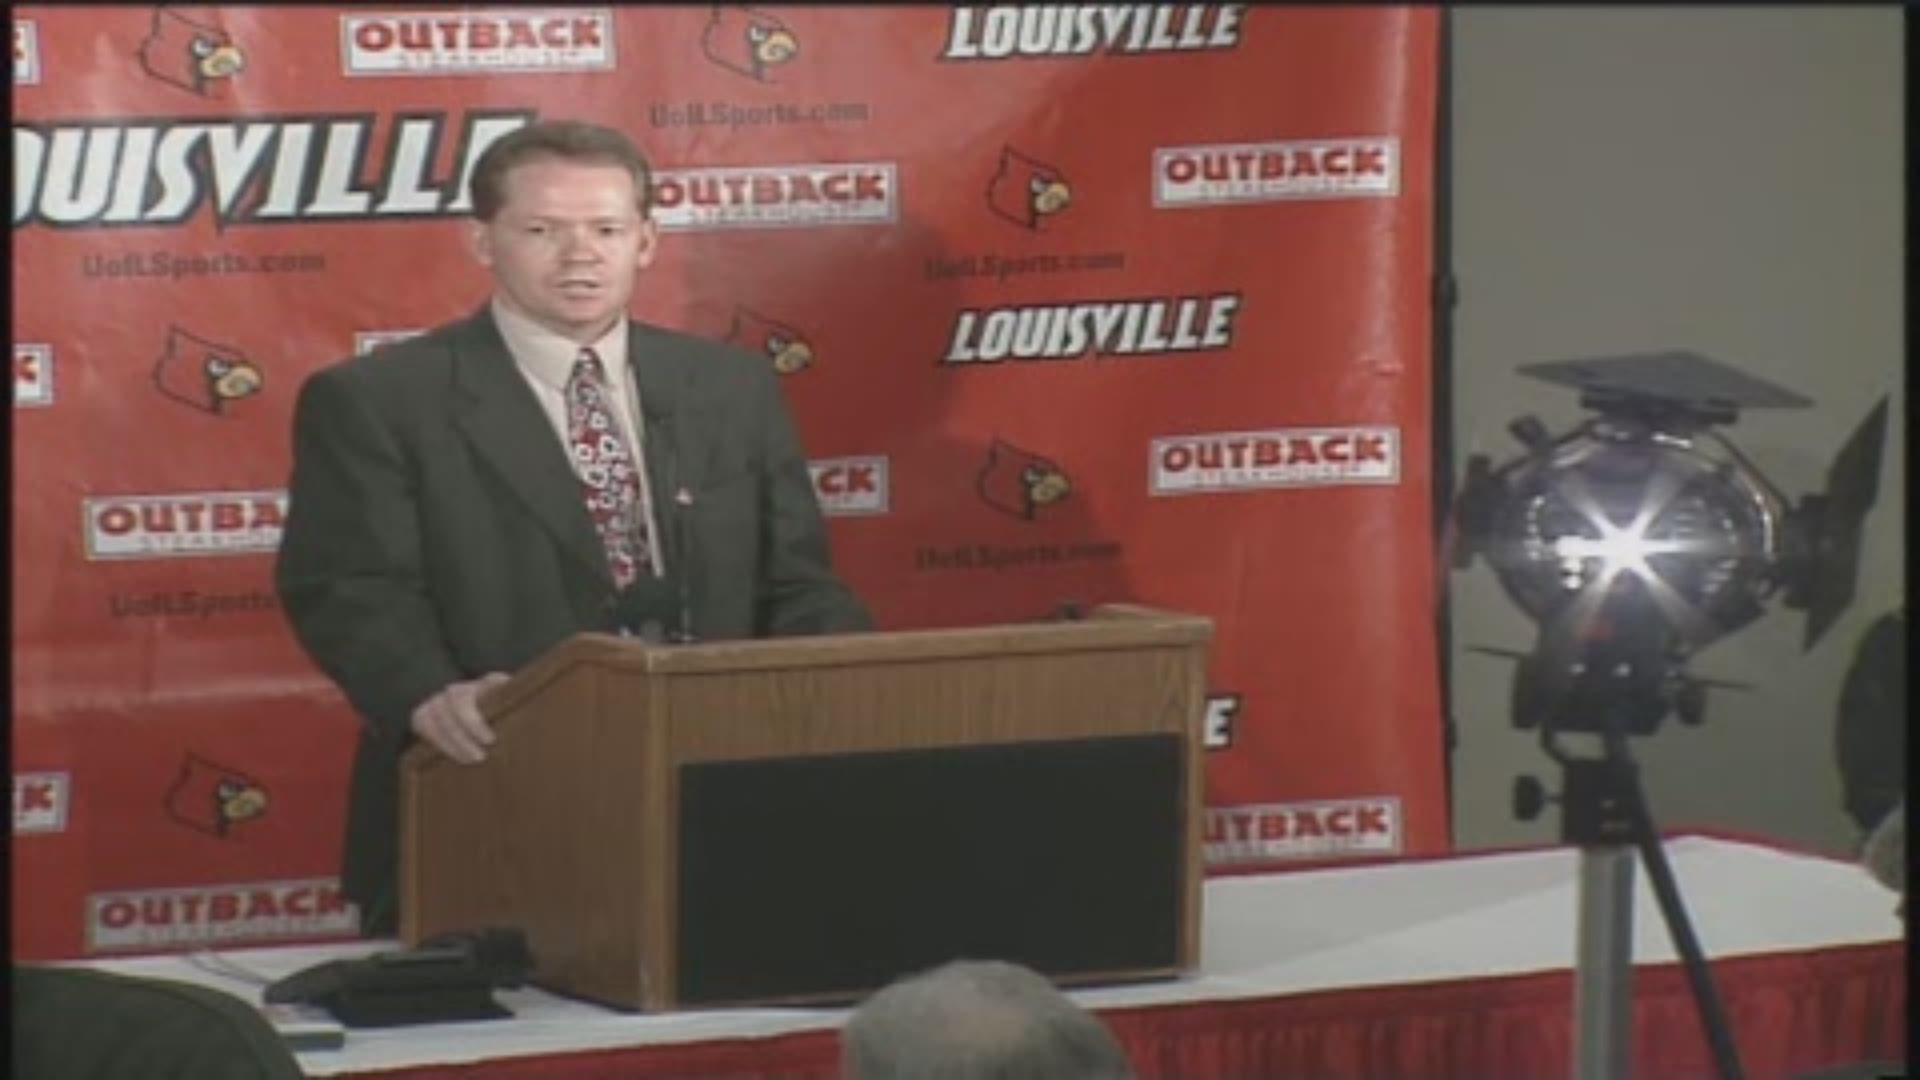 As Bobby Petrino moves on from Louisville, WHAS11's Whitney Harding gives us a look back at his career -- which wasn't without some headlines.